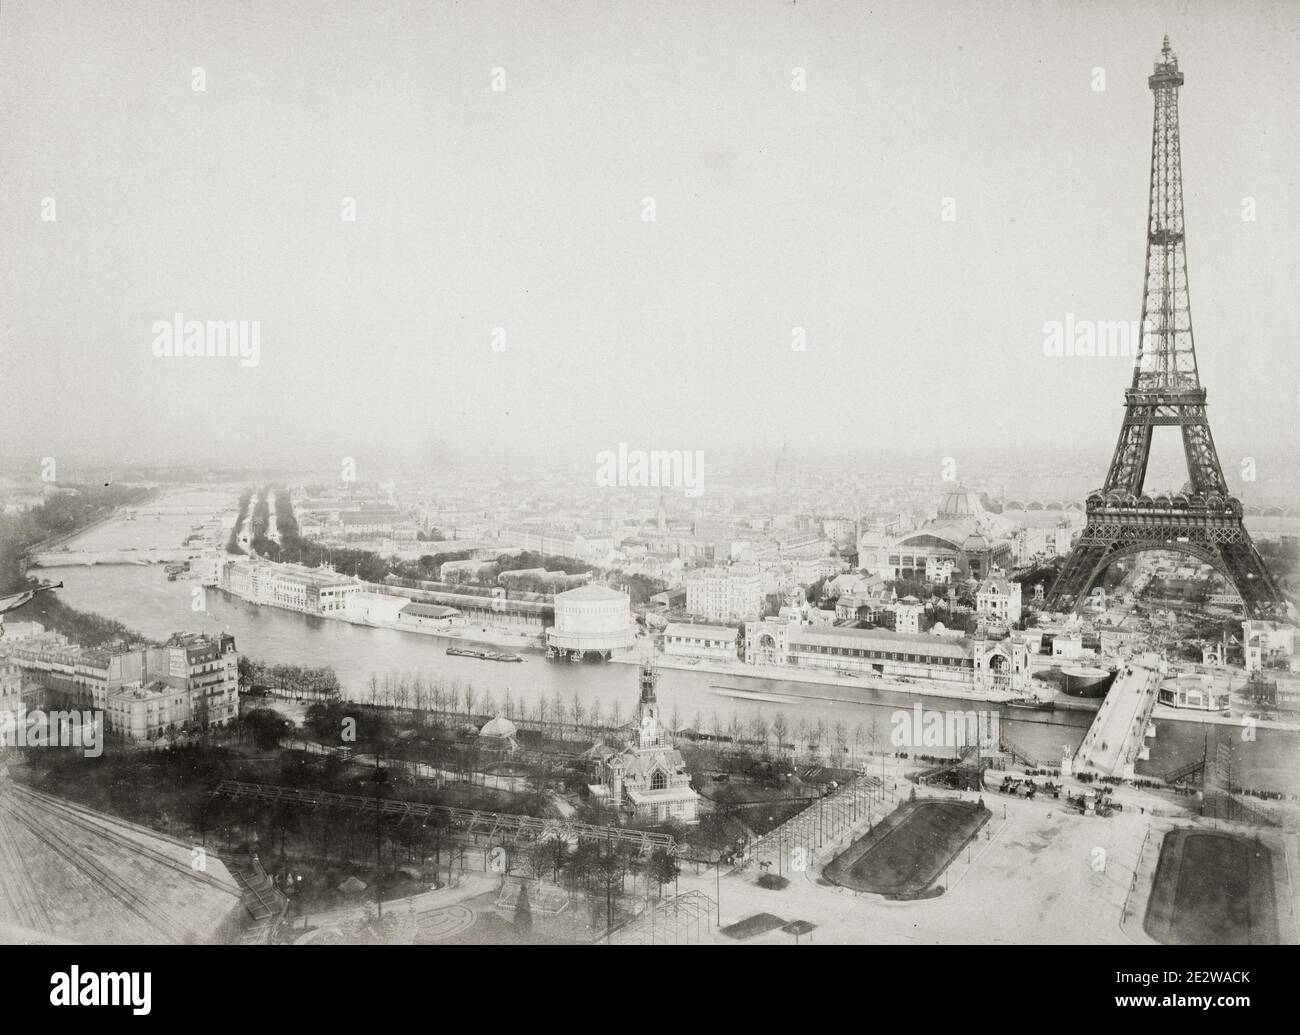 Vintage 19th century photograph: France - Eiffel Tower Paris, France. 1889. The Exposition Universelle of 1889 was a world's fair held in Paris, France, from 6 May to 31 October 1889. It was the fourth of eight expositions held in the city between 1855 and 1937. Stock Photo